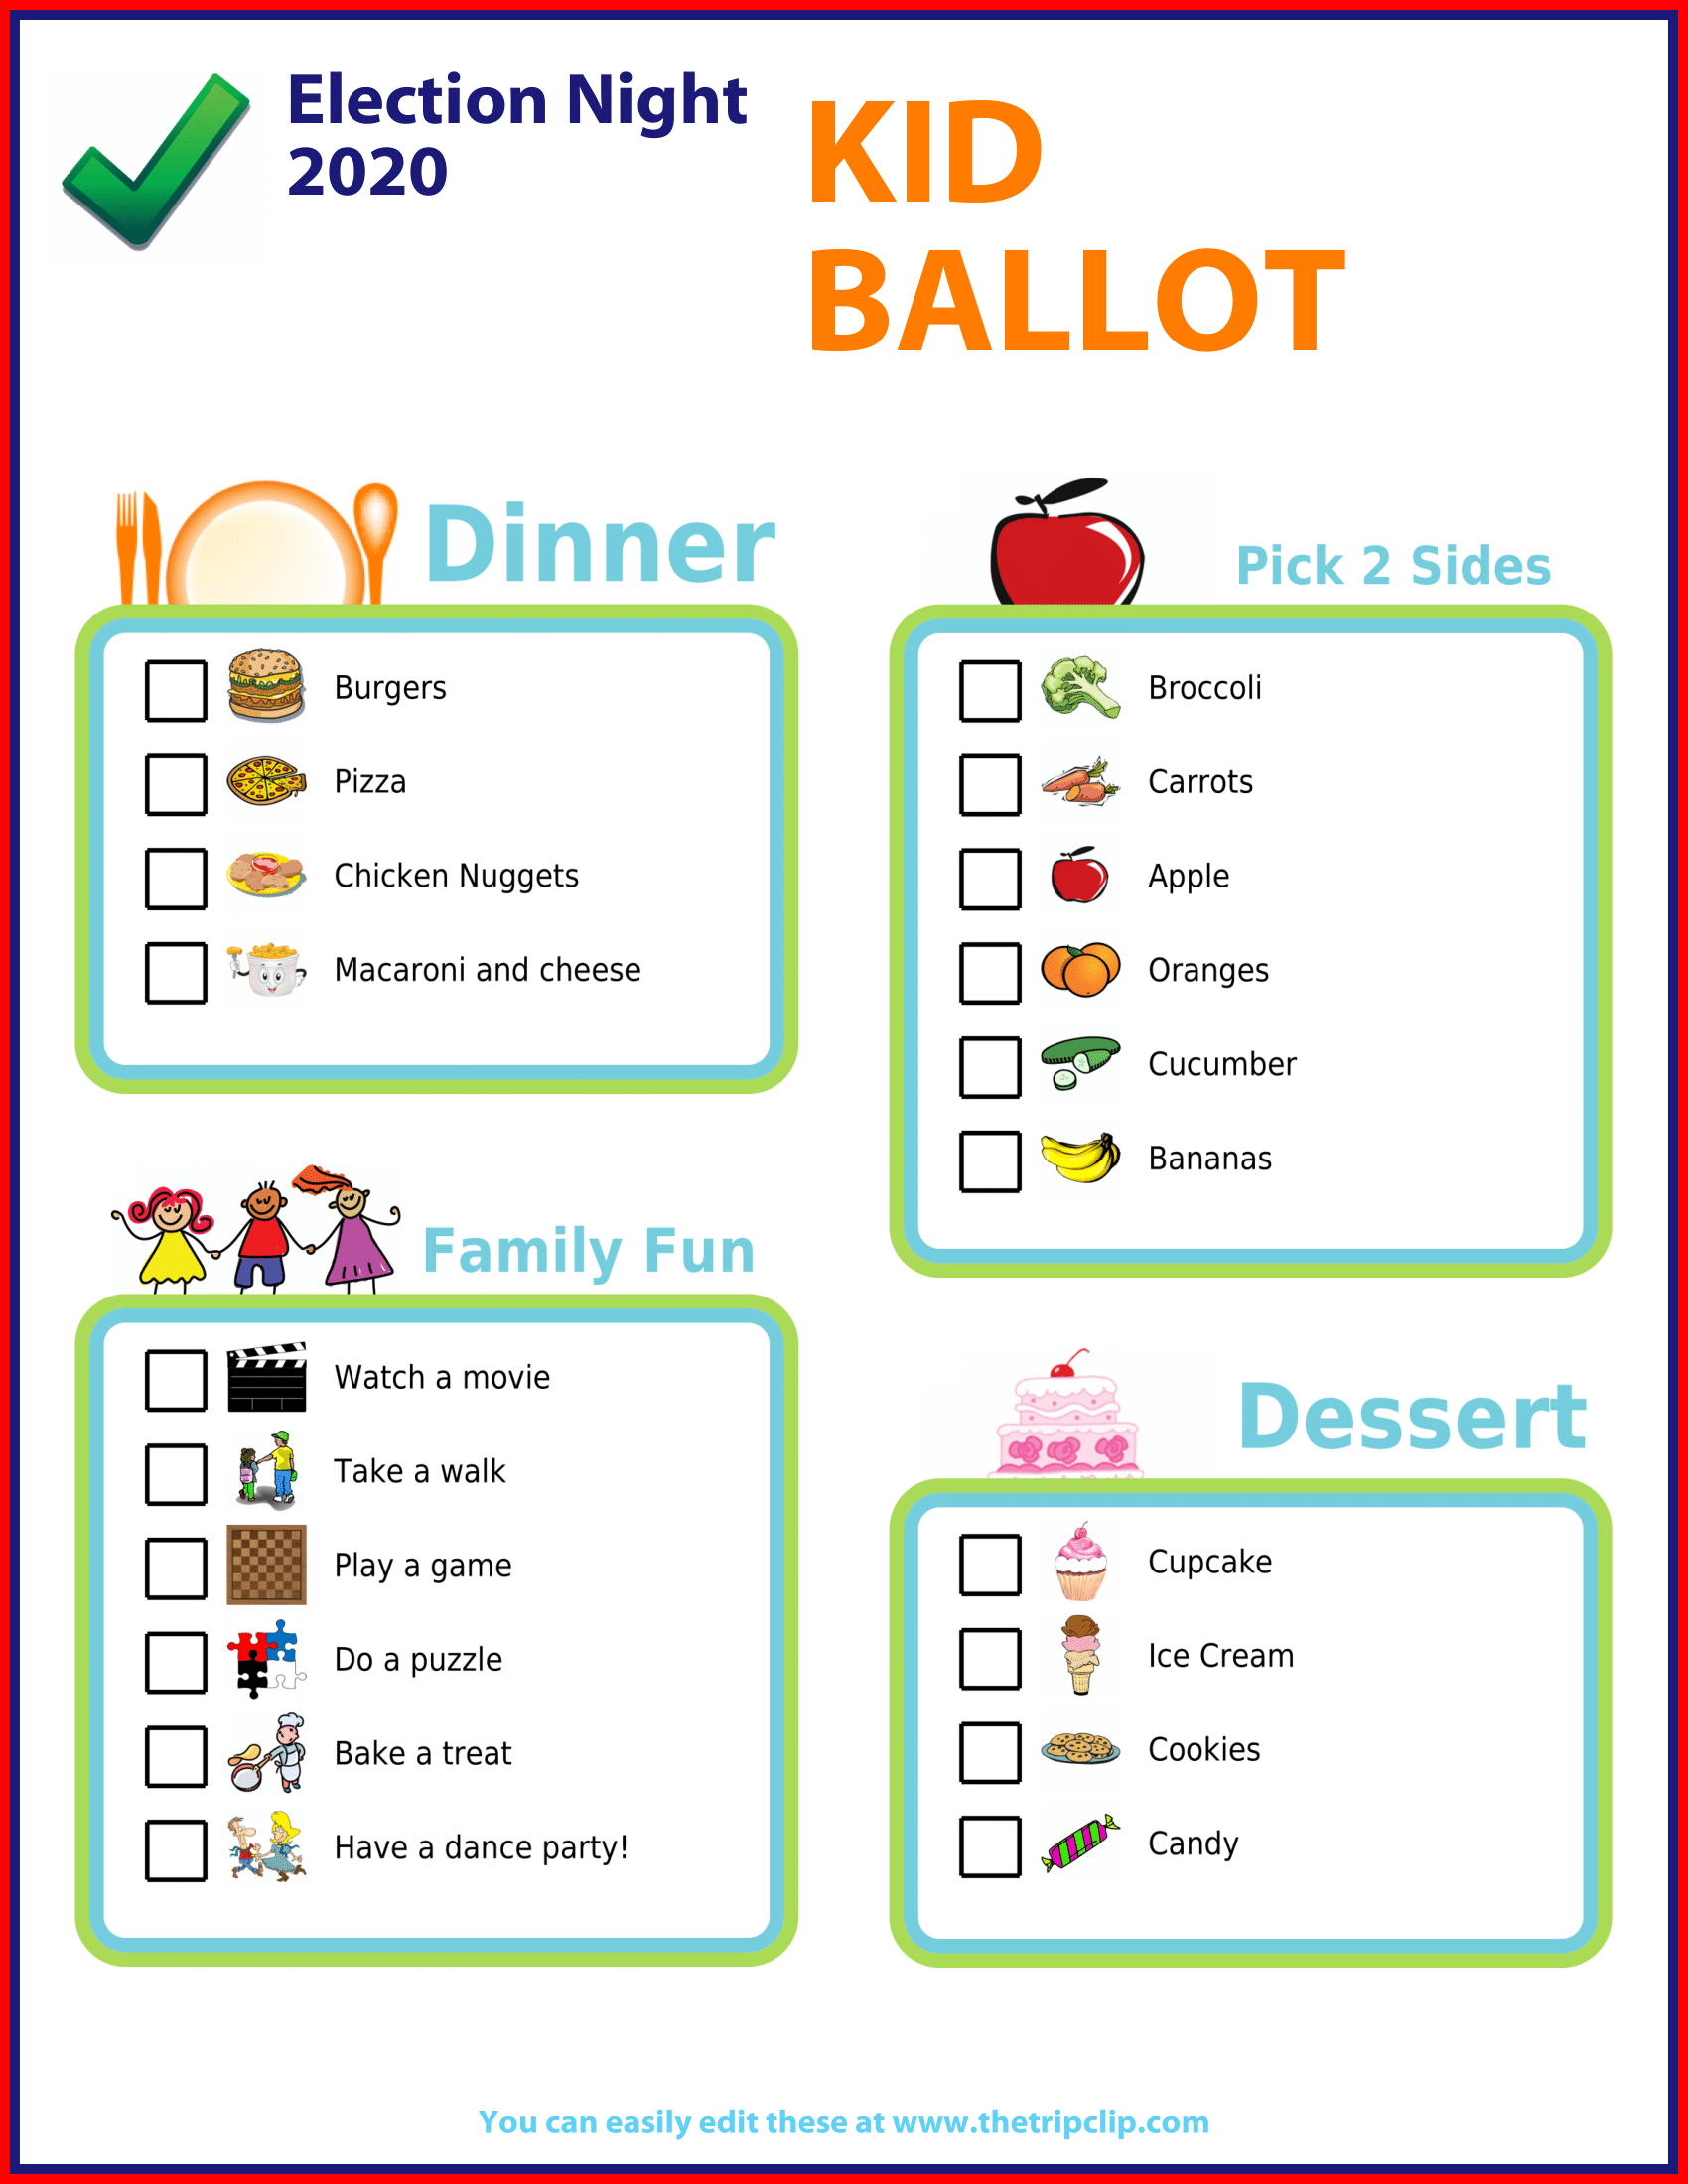 Pretend ballot so kids can vote for dinner, sides, dessert, and fun activity